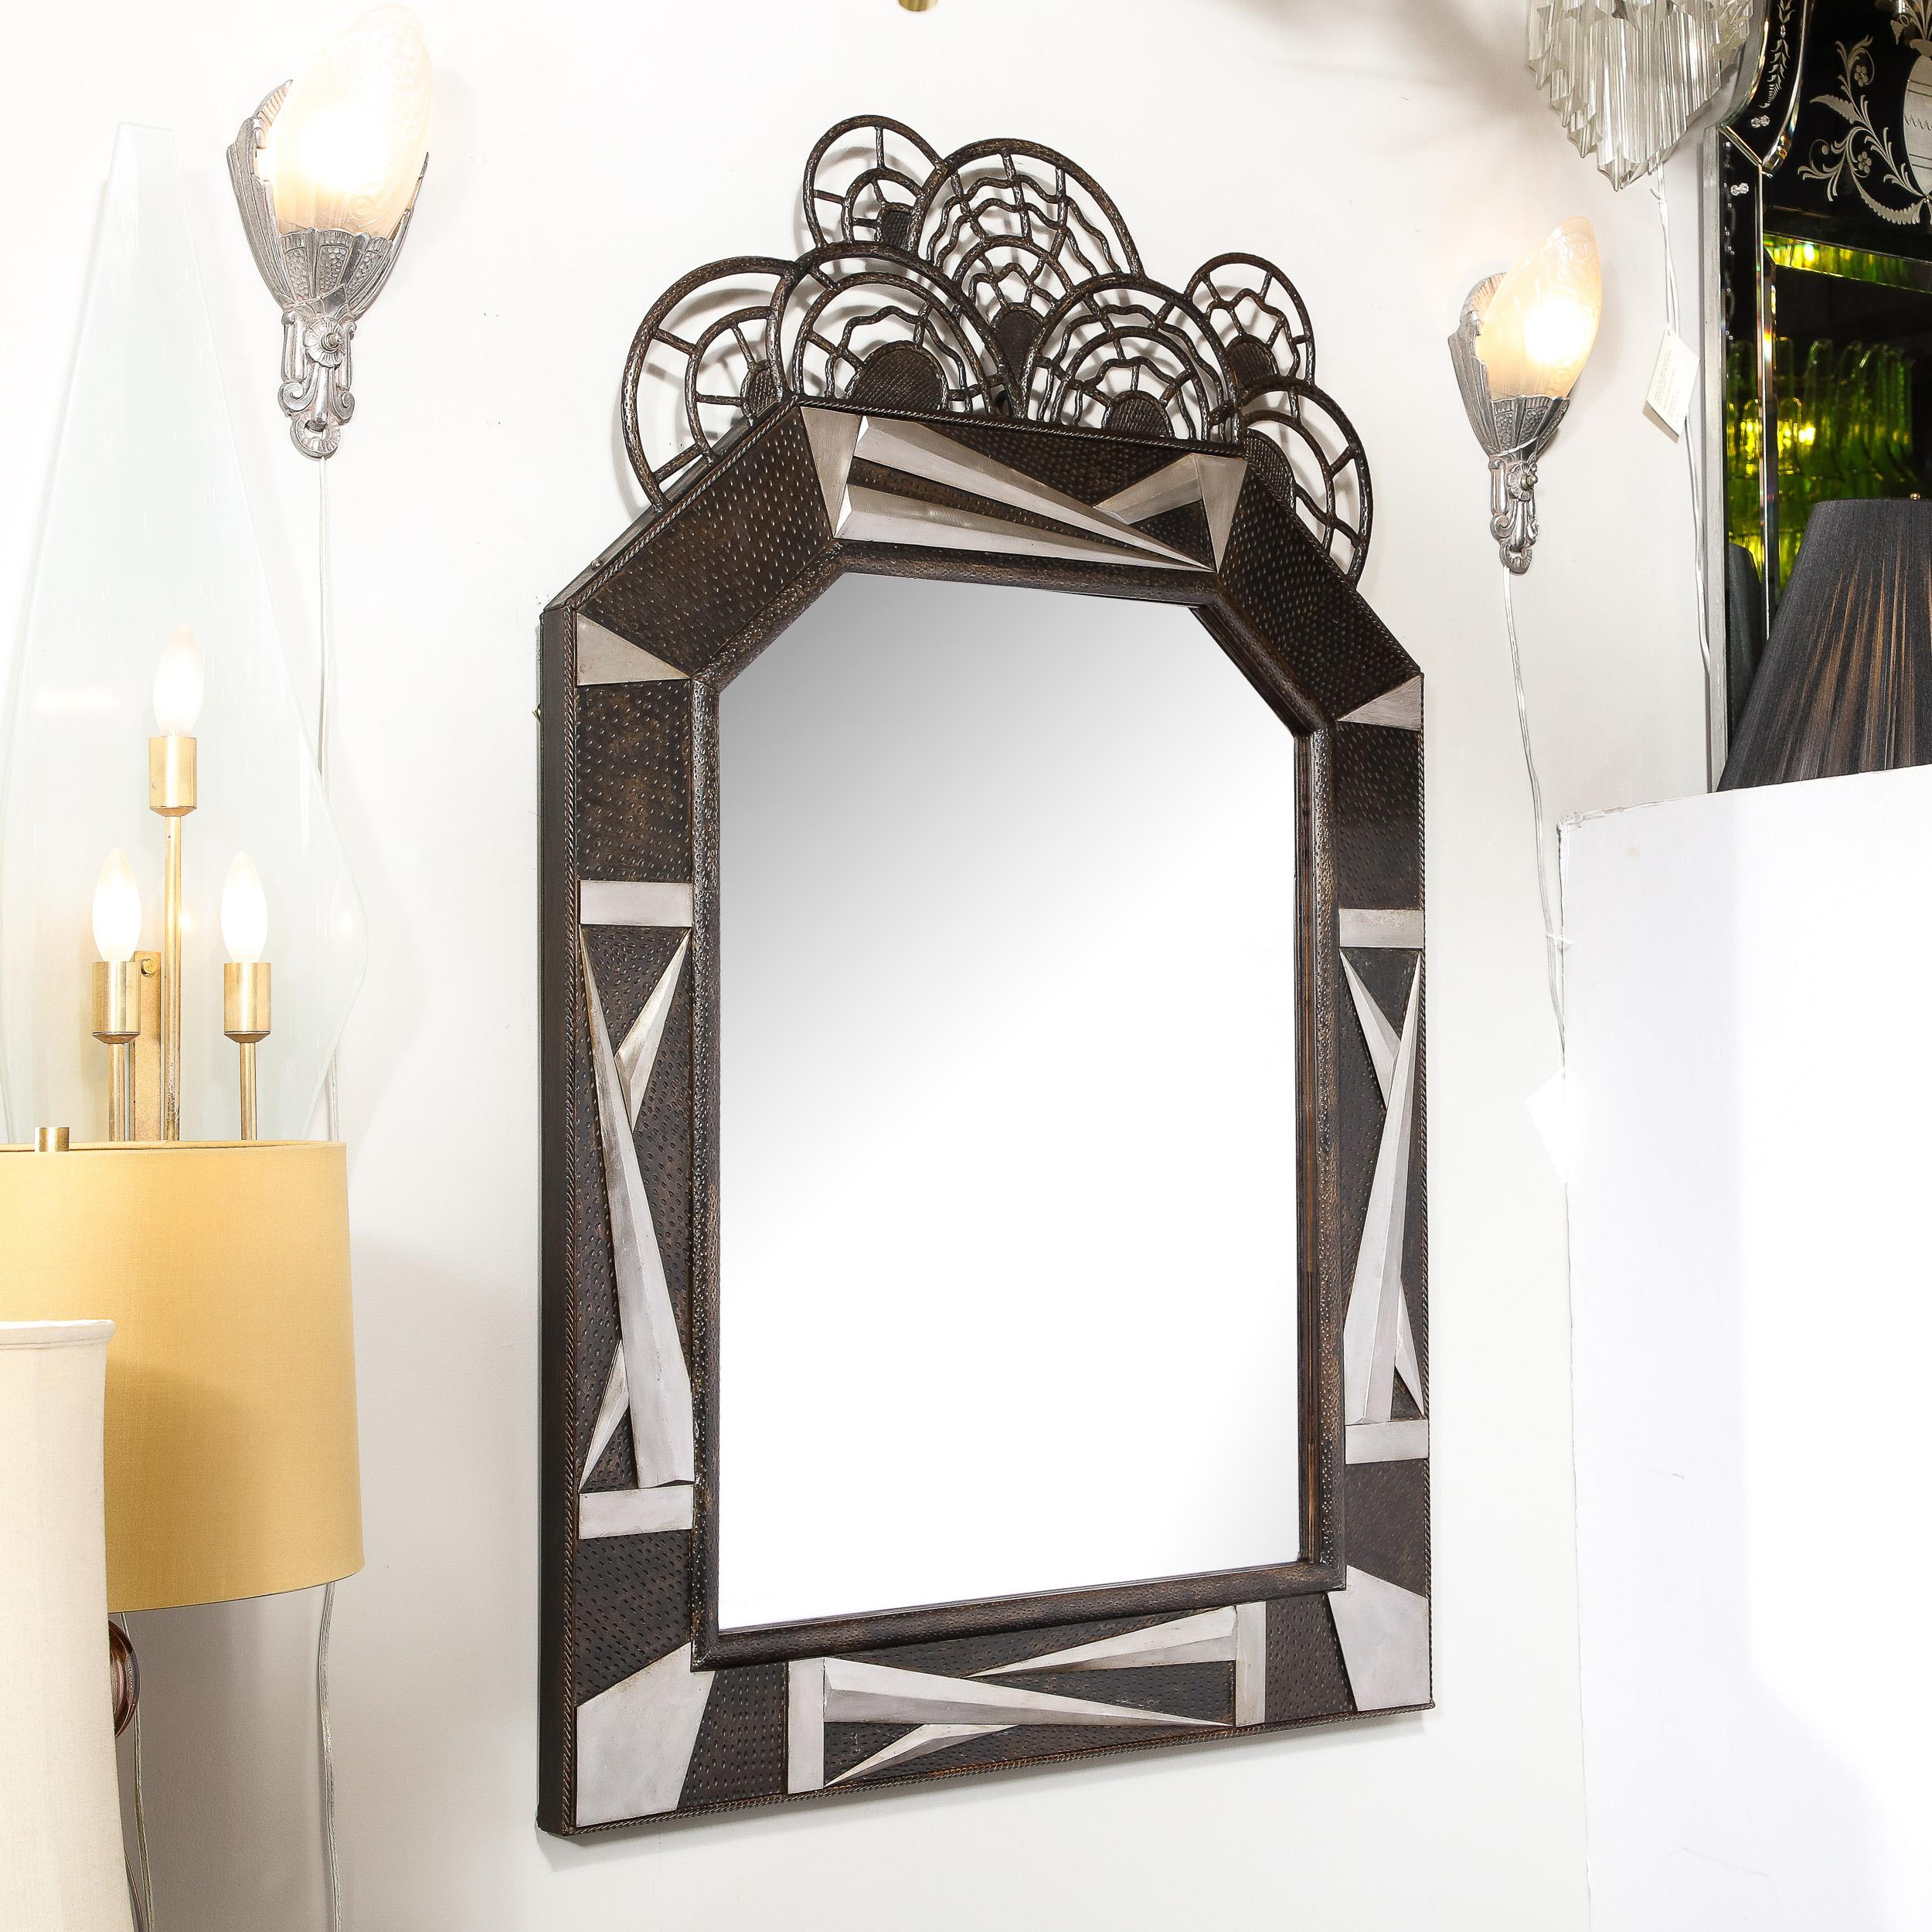 This Art Deco Wrought Iron Mirror with Highly Stylized Cubist Detailing and stylized geometric Floral Elements originates from France, Circa 1930 and is truly a work of art. The piece features a faceted geometric triangle shard motif in brushed